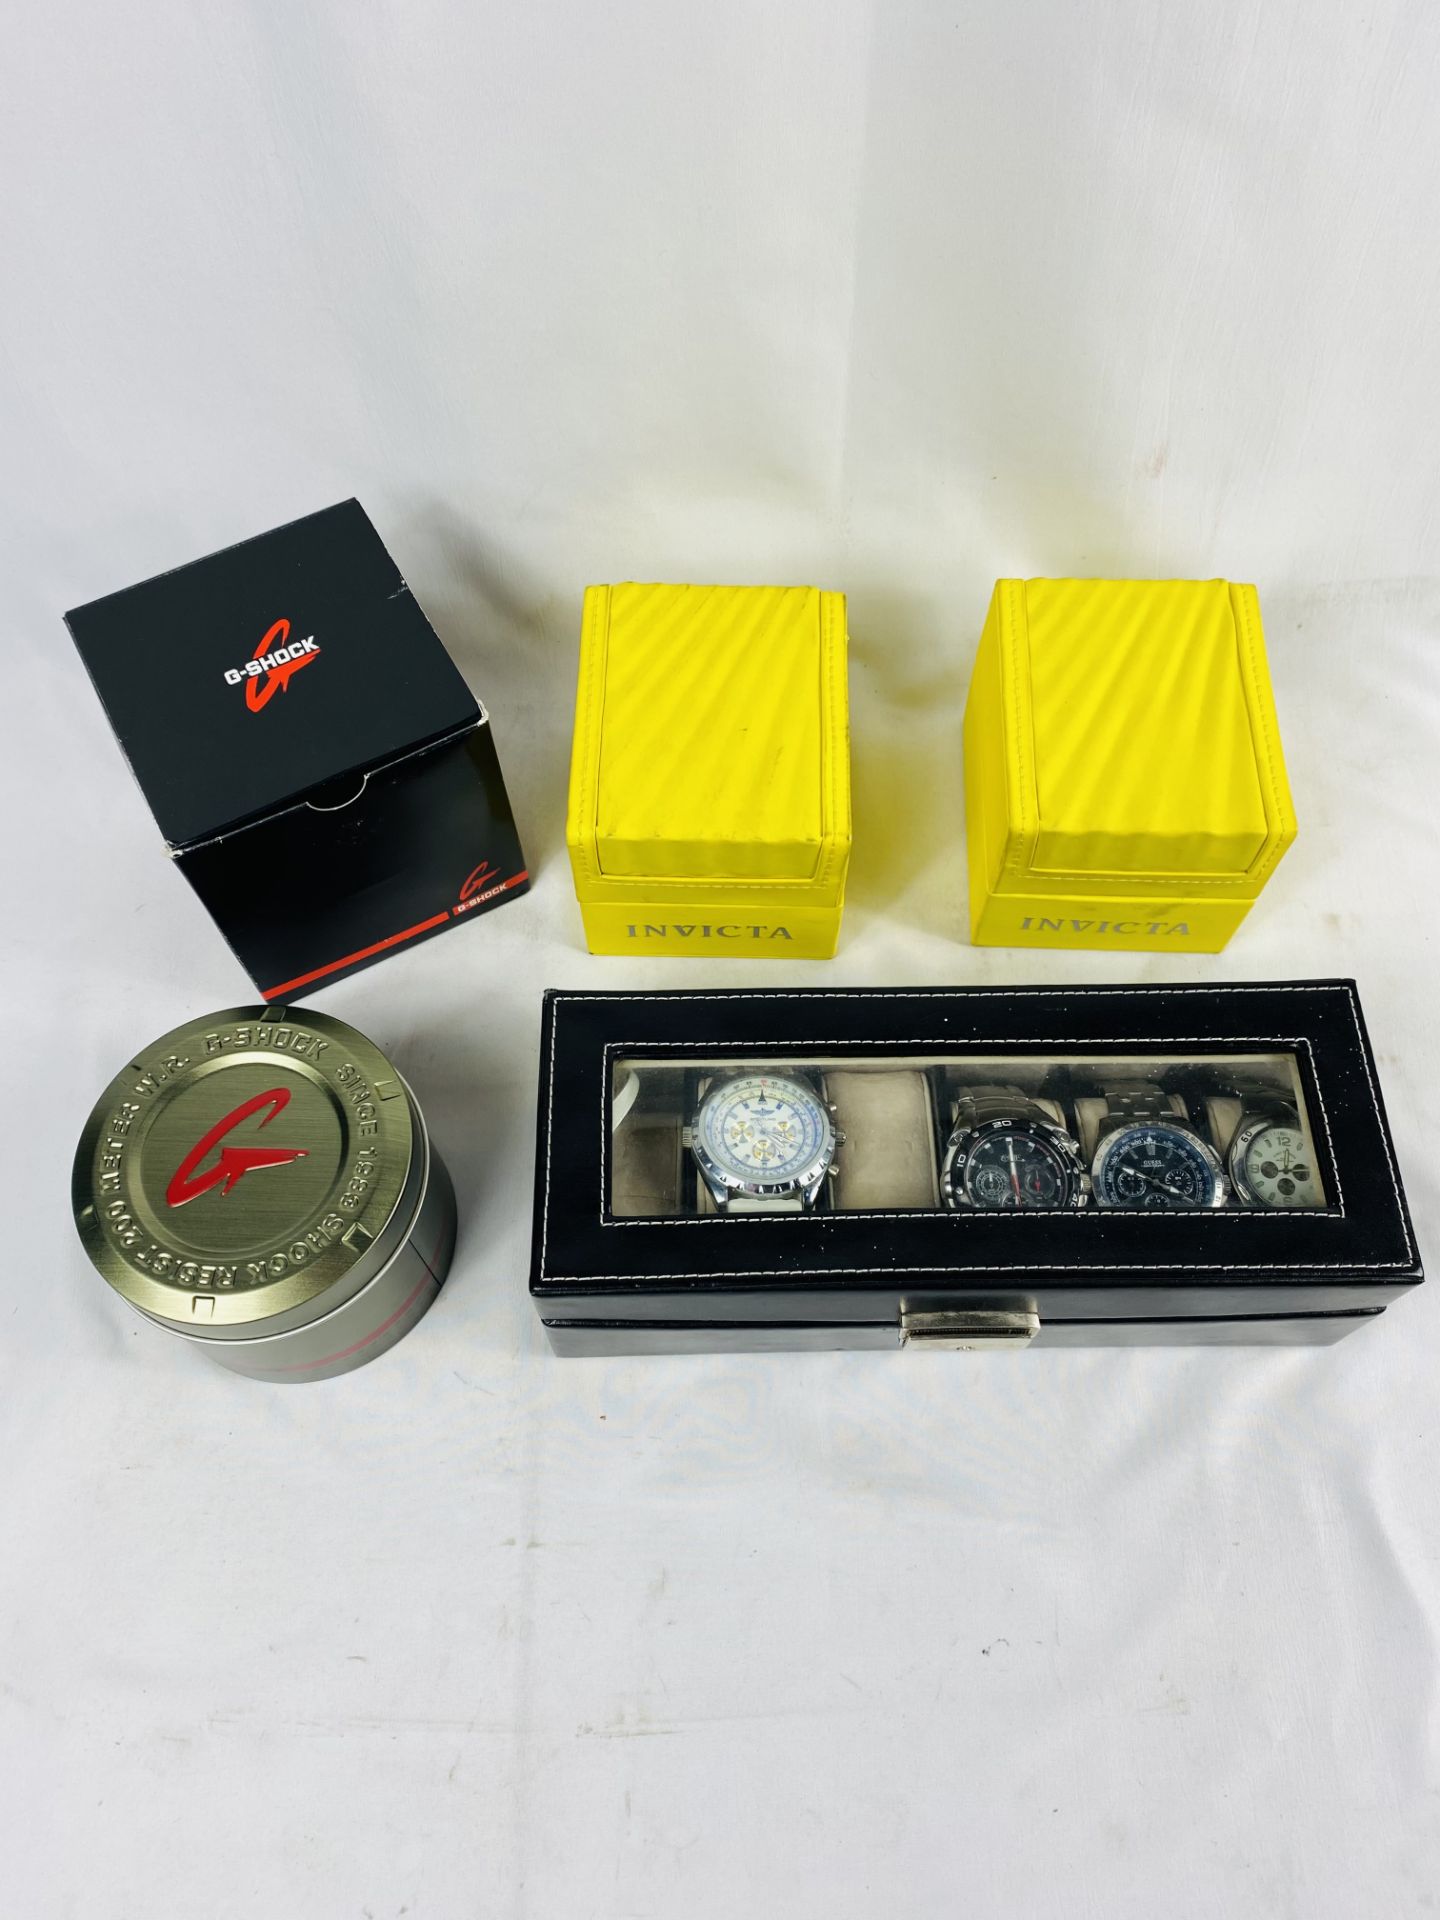 Casio G Shock watch together with six other watches - Image 6 of 6